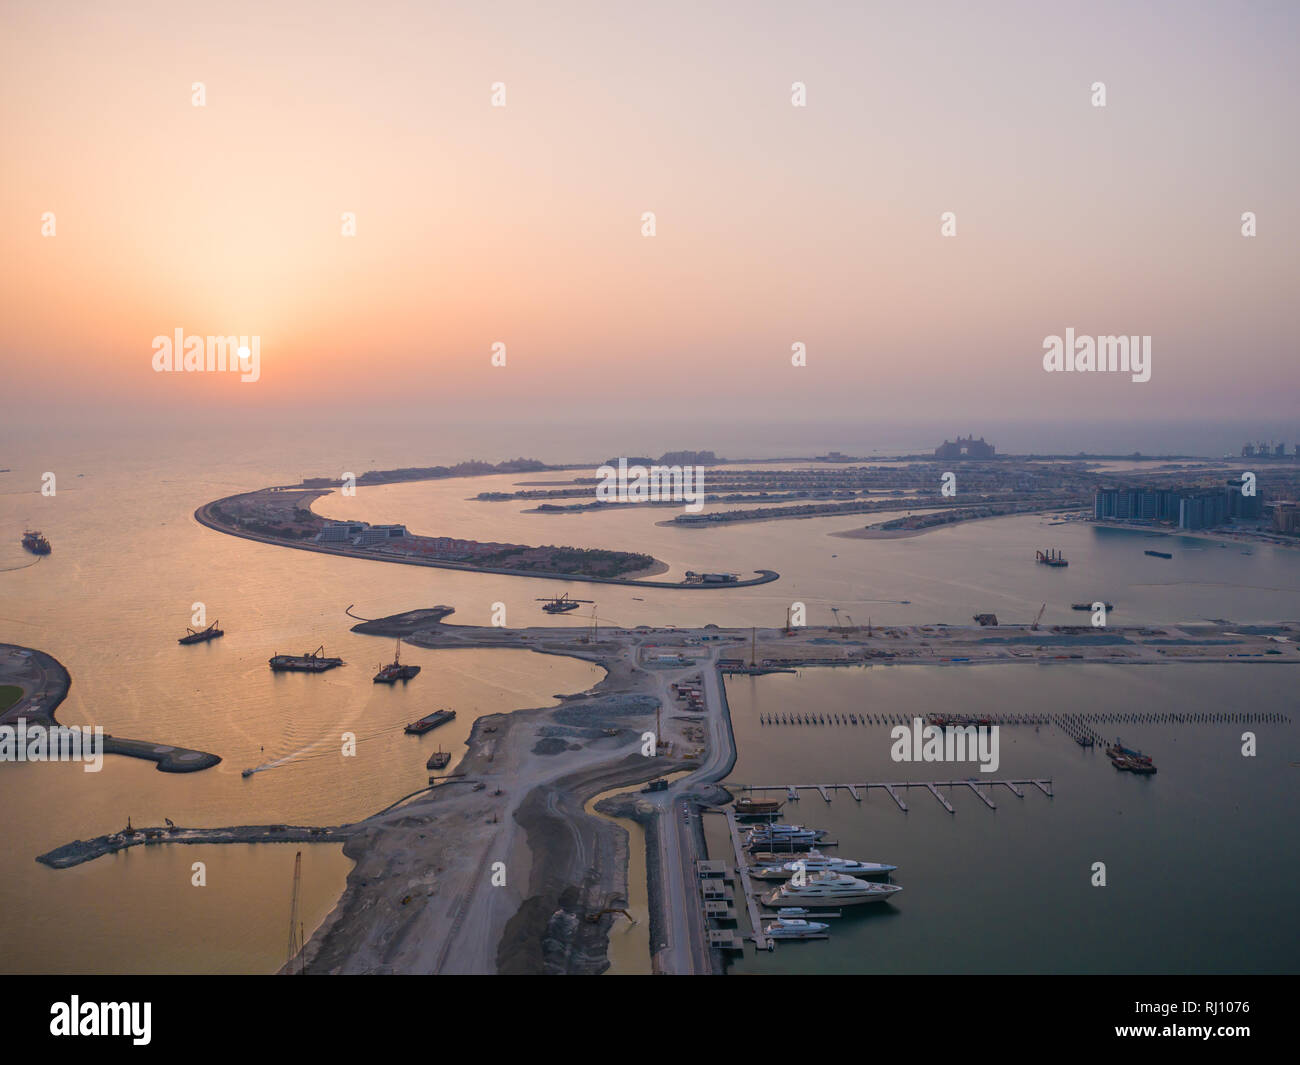 Sunset and night over the artificial islands of Dubai. Timelapse. Stock Photo